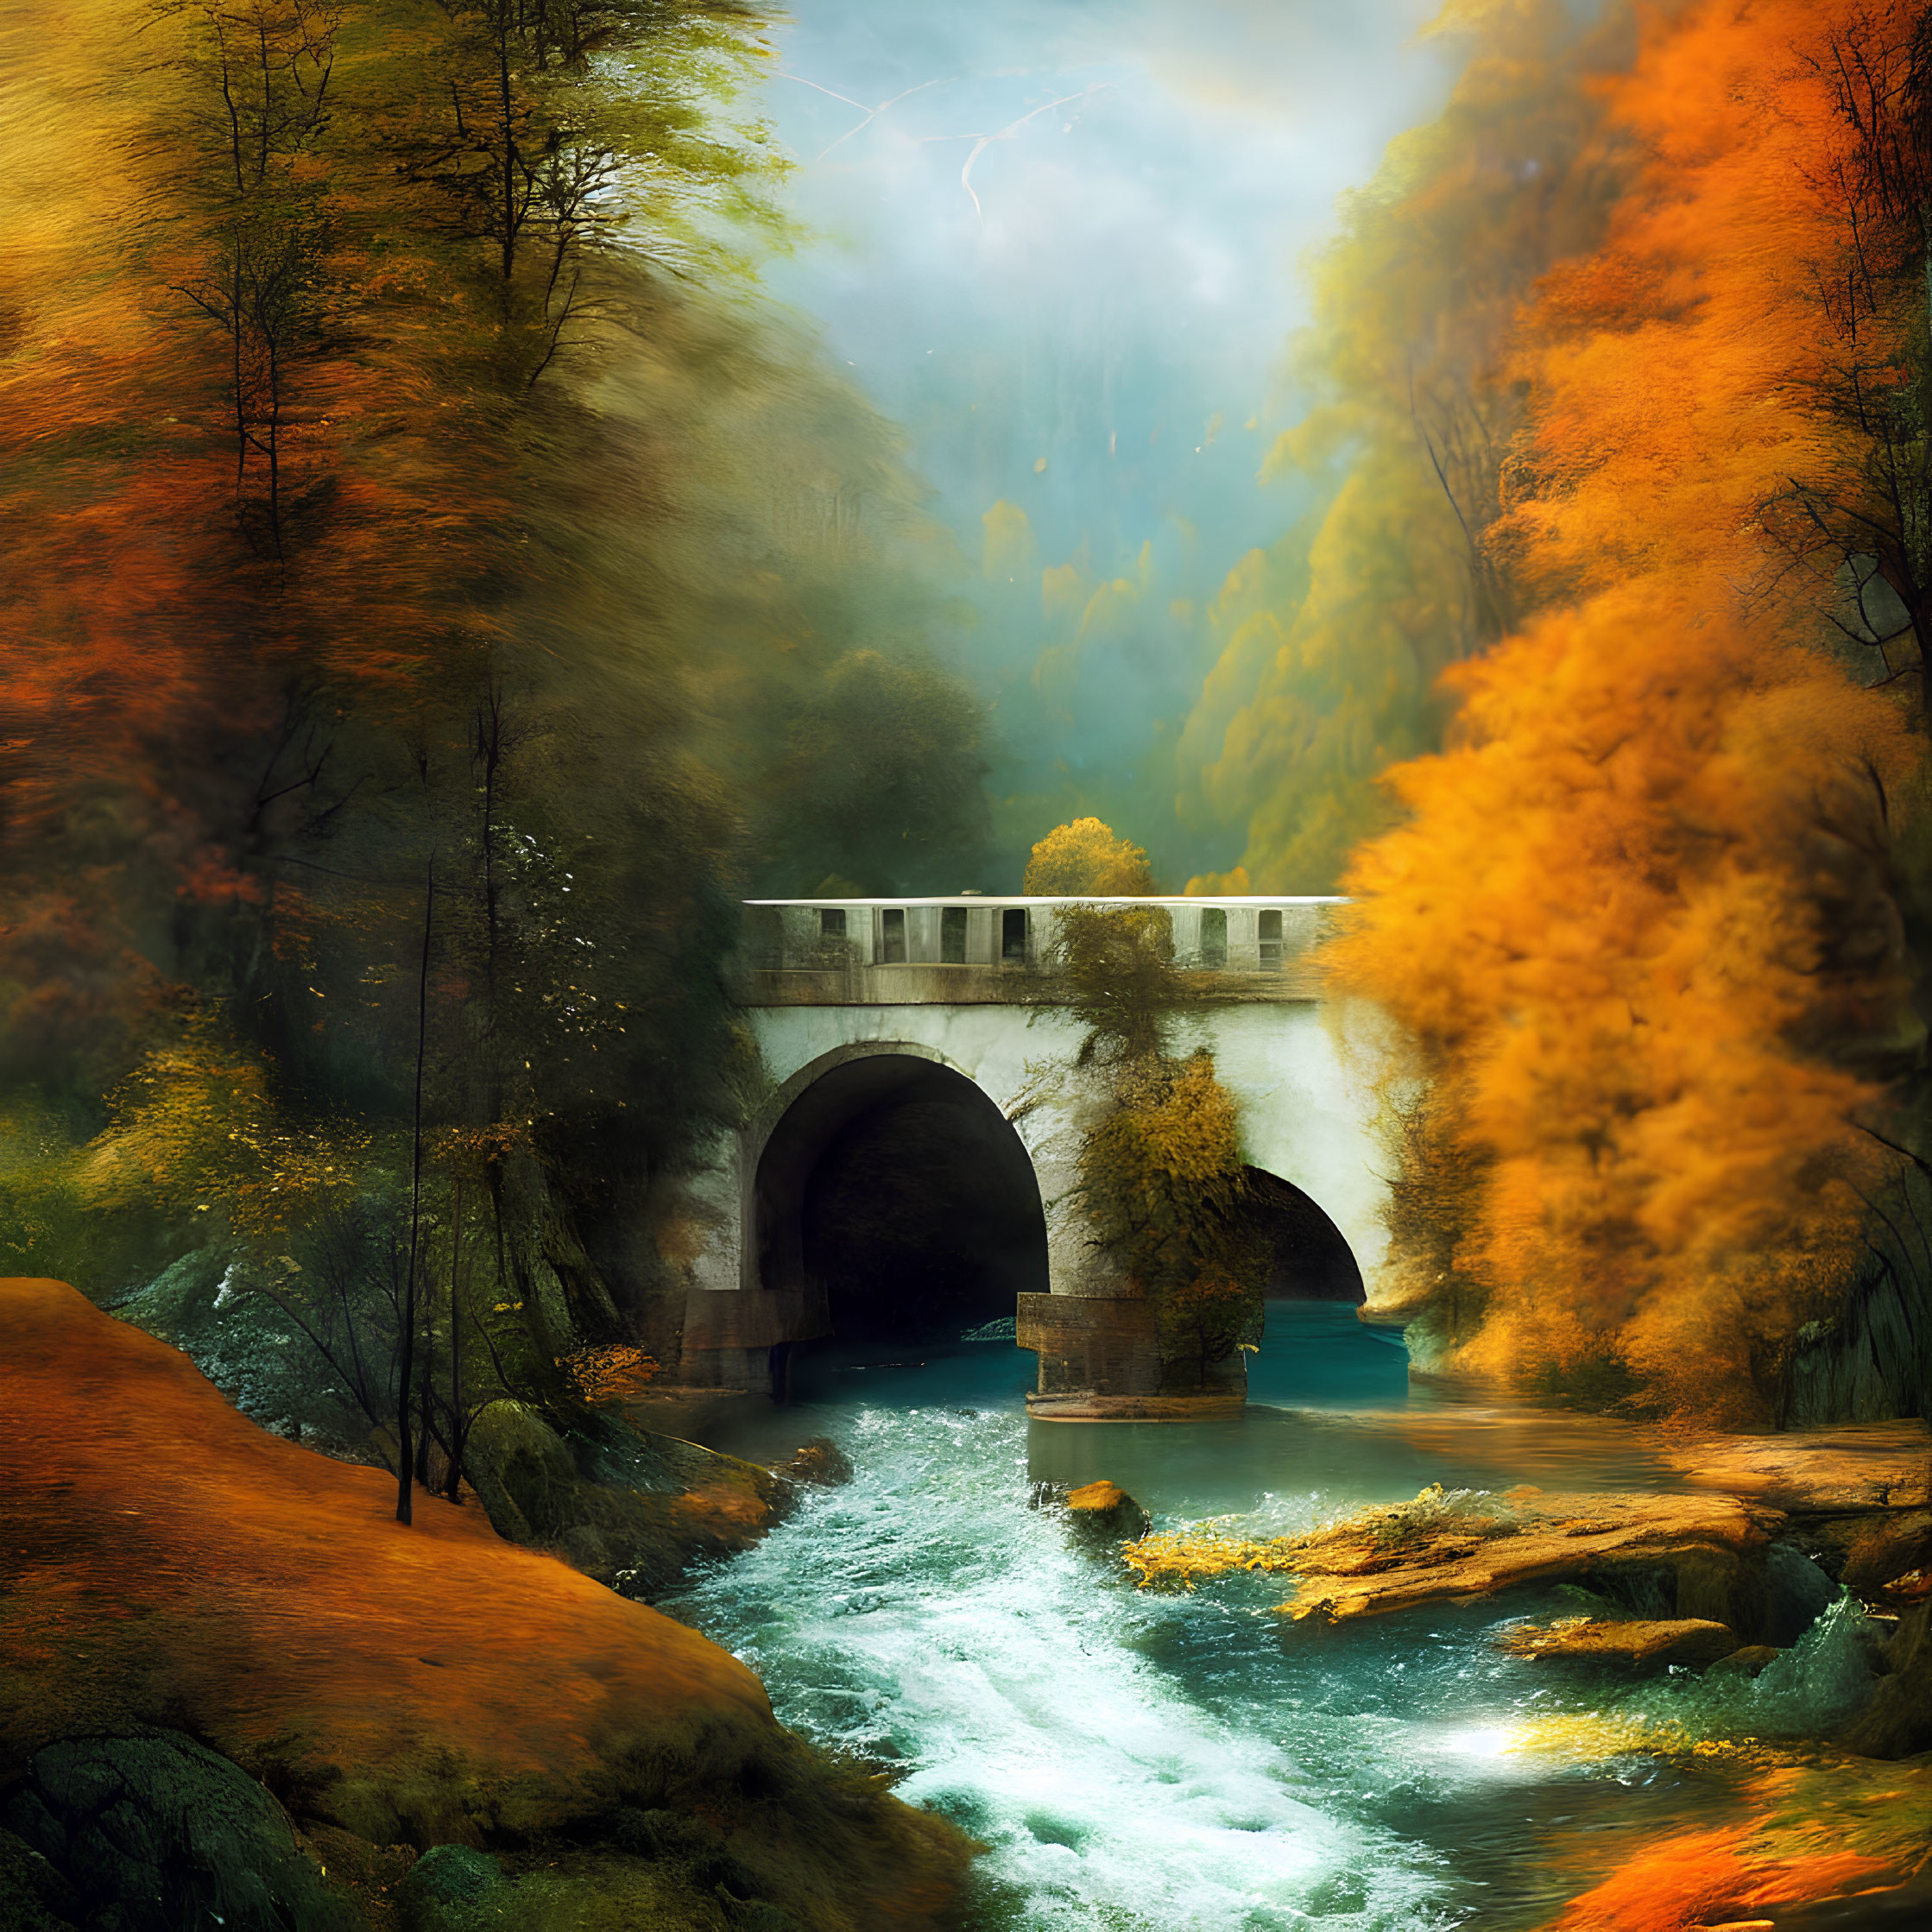 Tranquil autumn landscape with stone bridge and misty trees